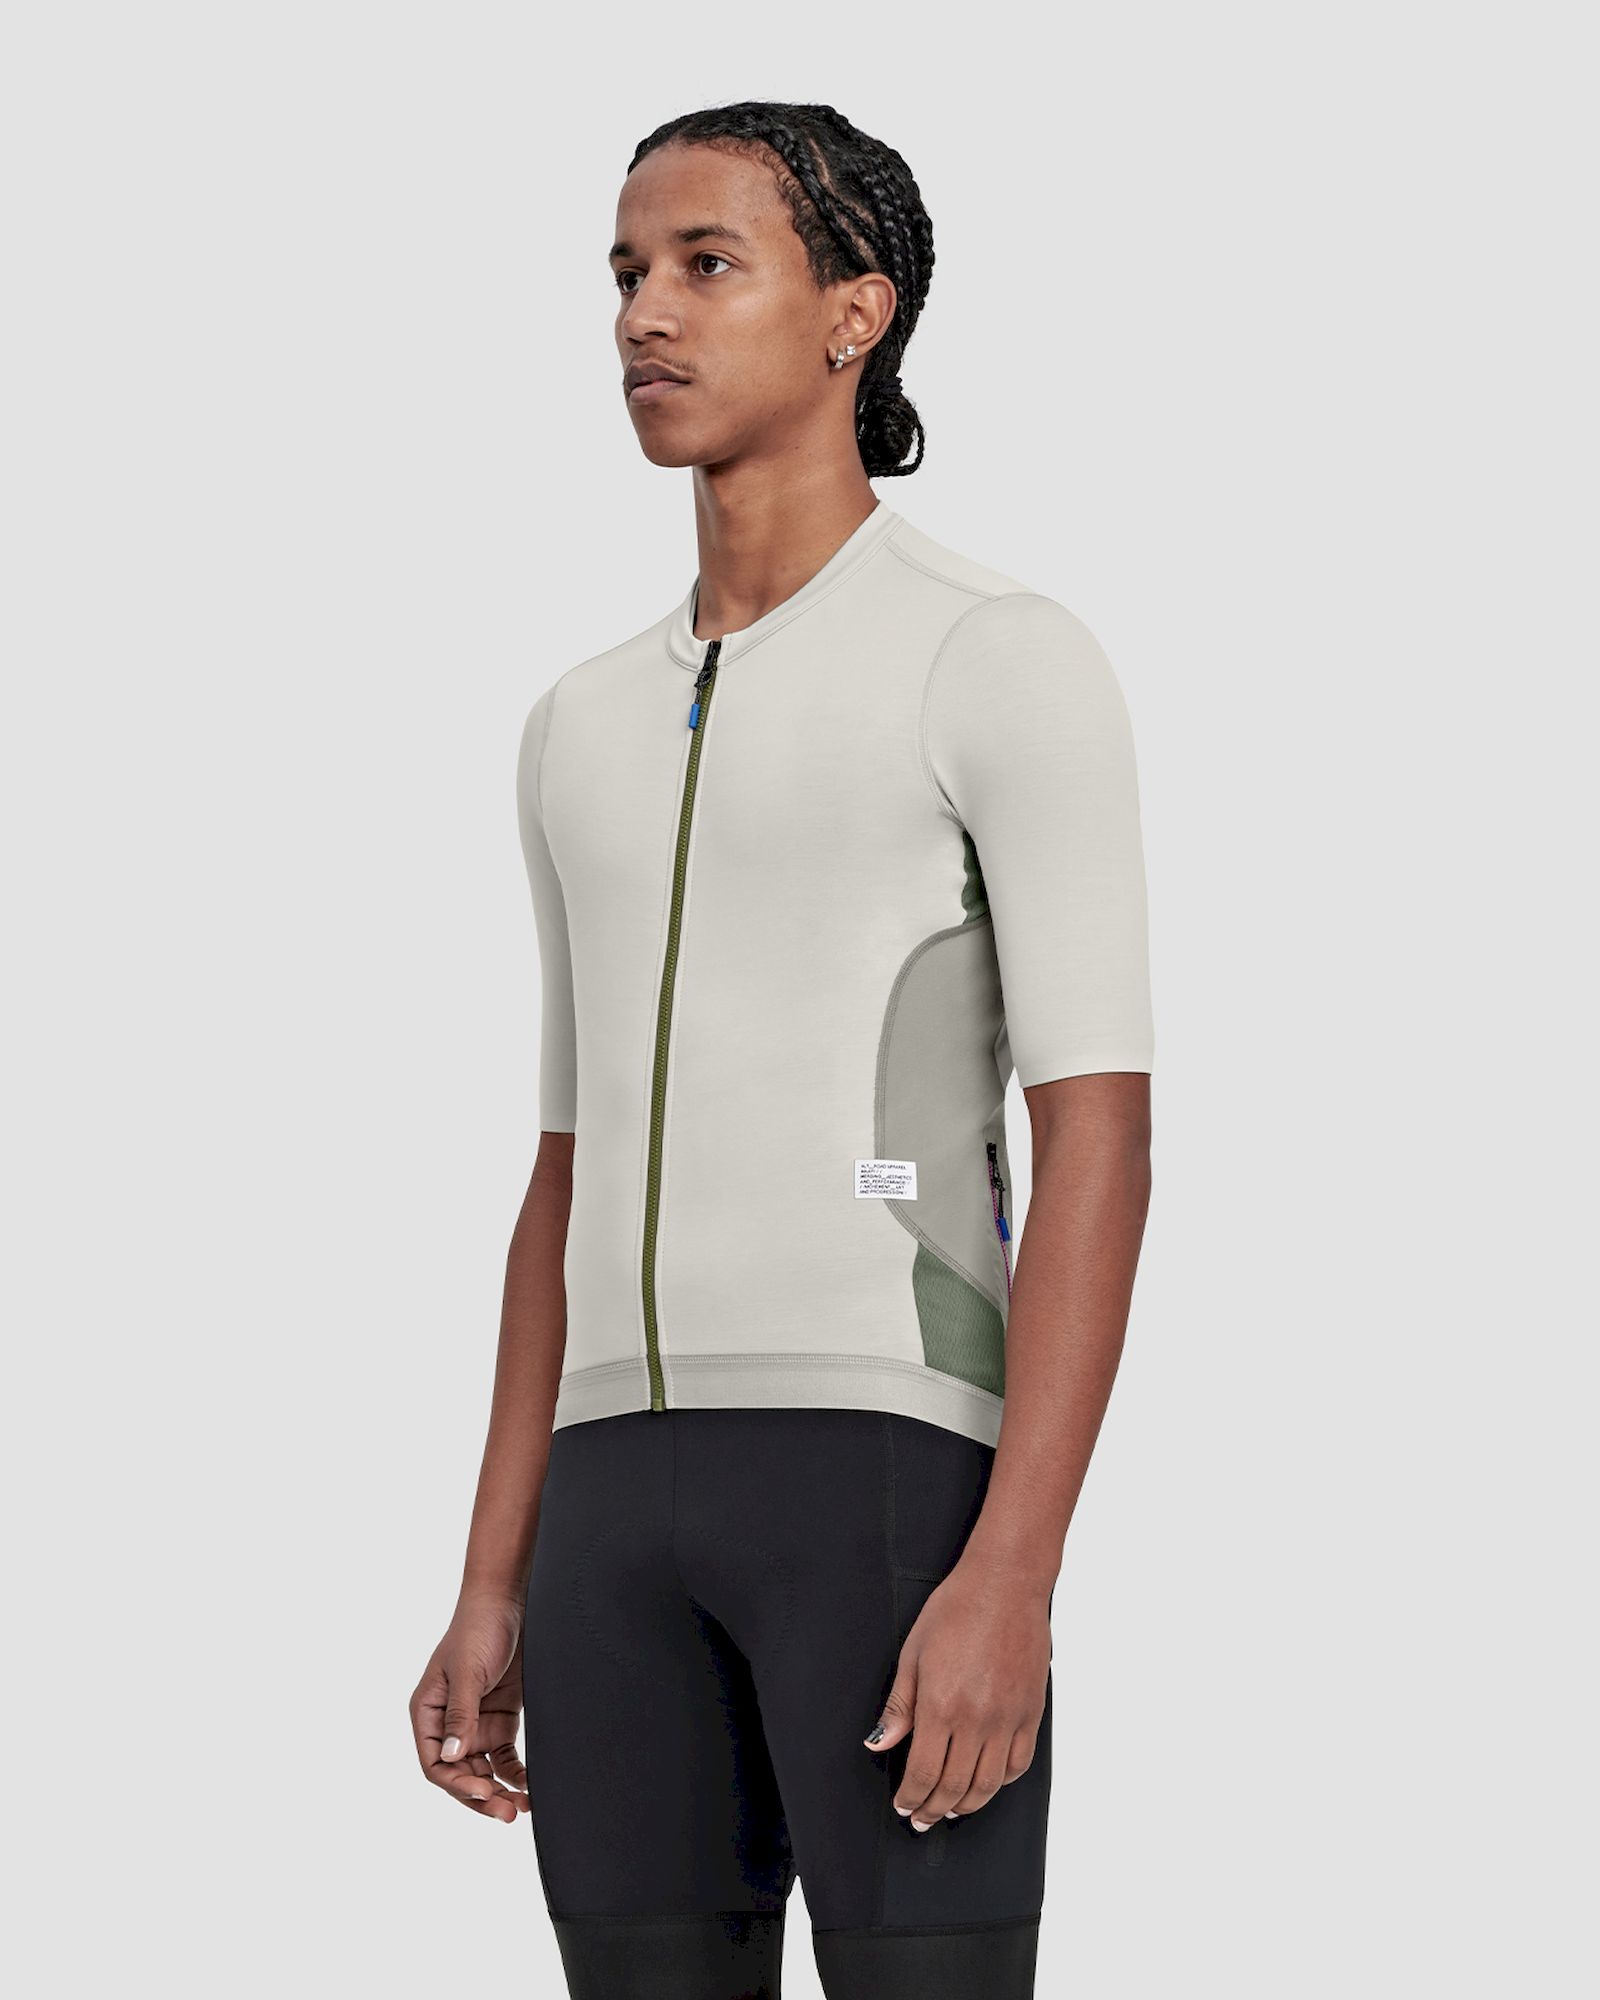 Maap AltRoad Jersey - Maillot vélo homme | Hardloop